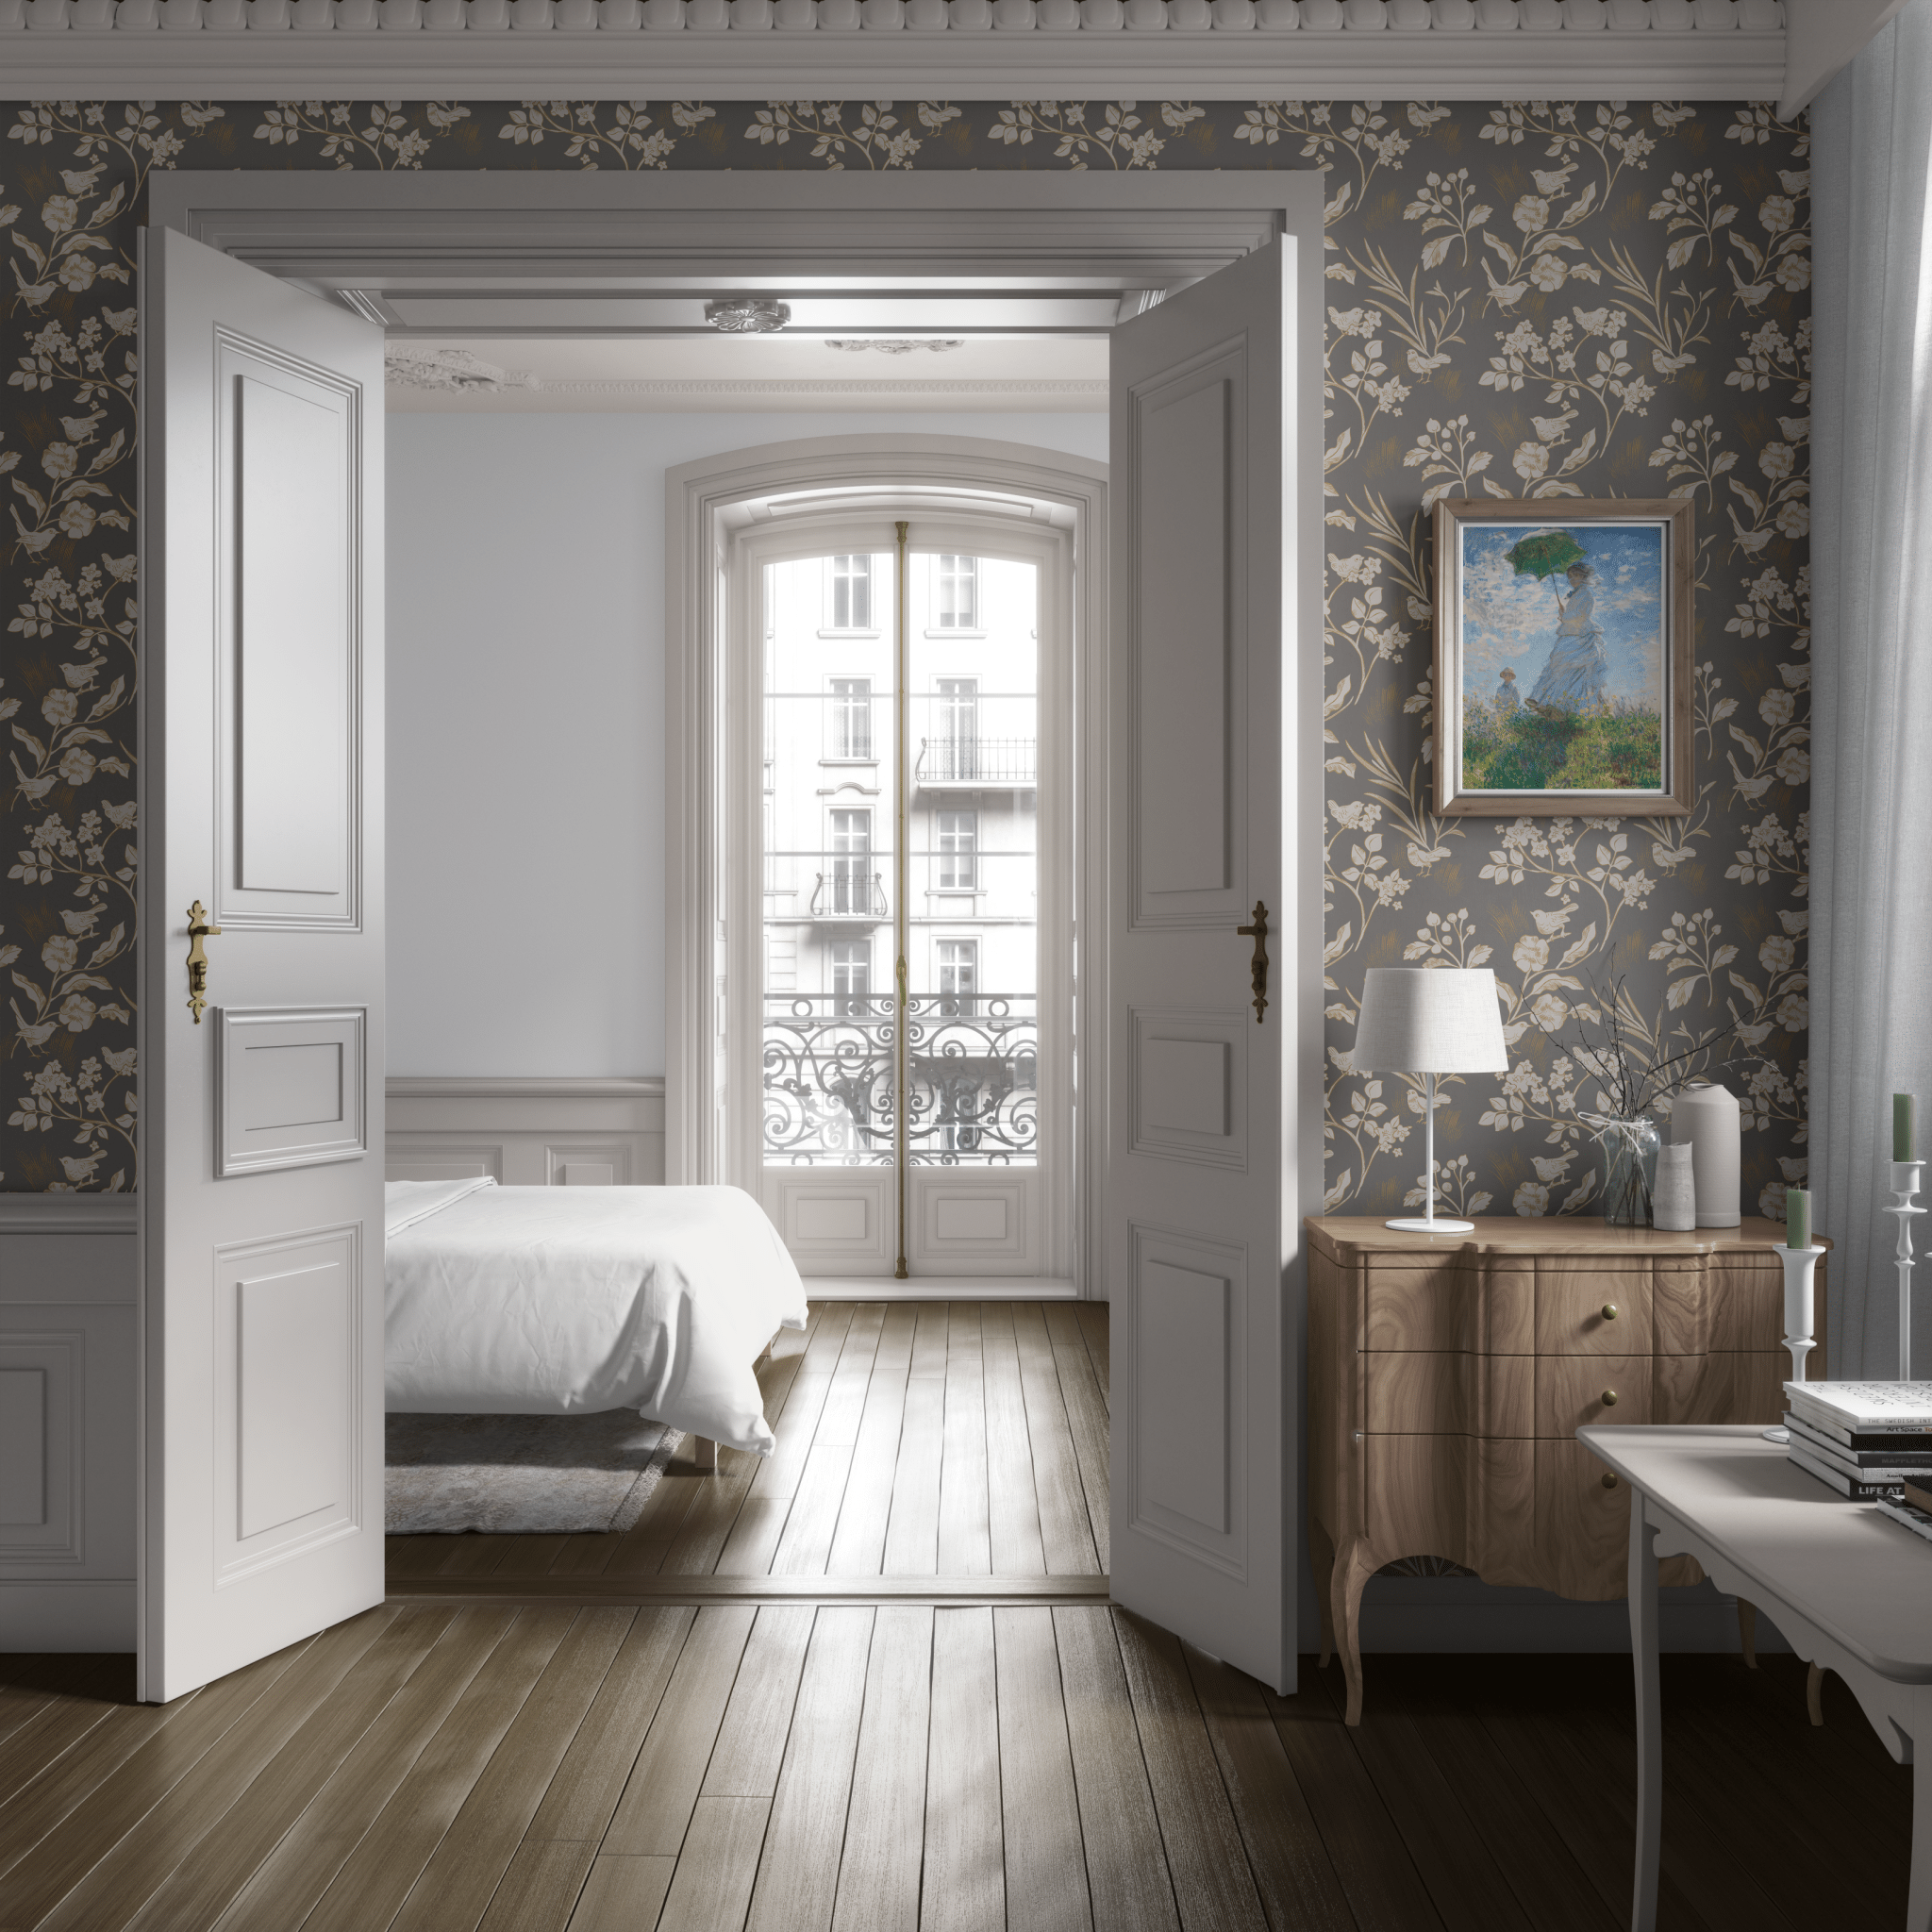 A bedroom with dark floral peel and stick wallpaper featuring birds and classic greenery, a classic wooden dresser, and herringbone floor."A bedroom with dark floral peel and stick wallpaper featuring birds and classic greenery, a classic wooden dresser, and herringbone floor.